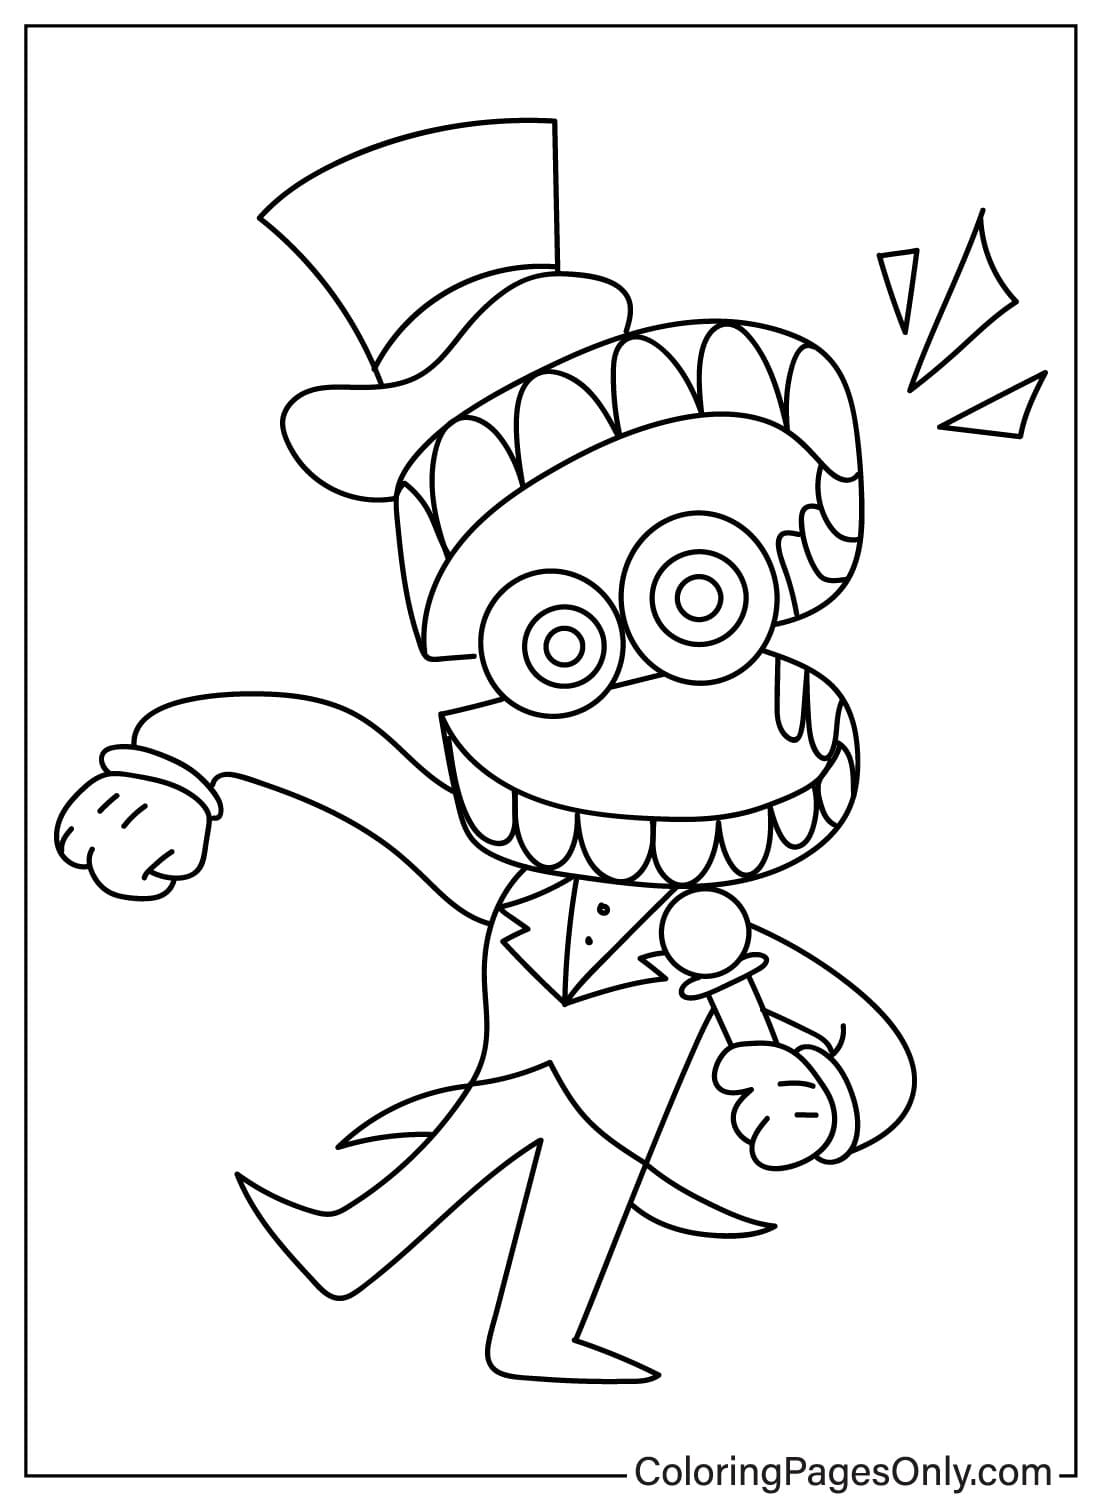 Images Caine Coloring Page - Free Printable Coloring Pages